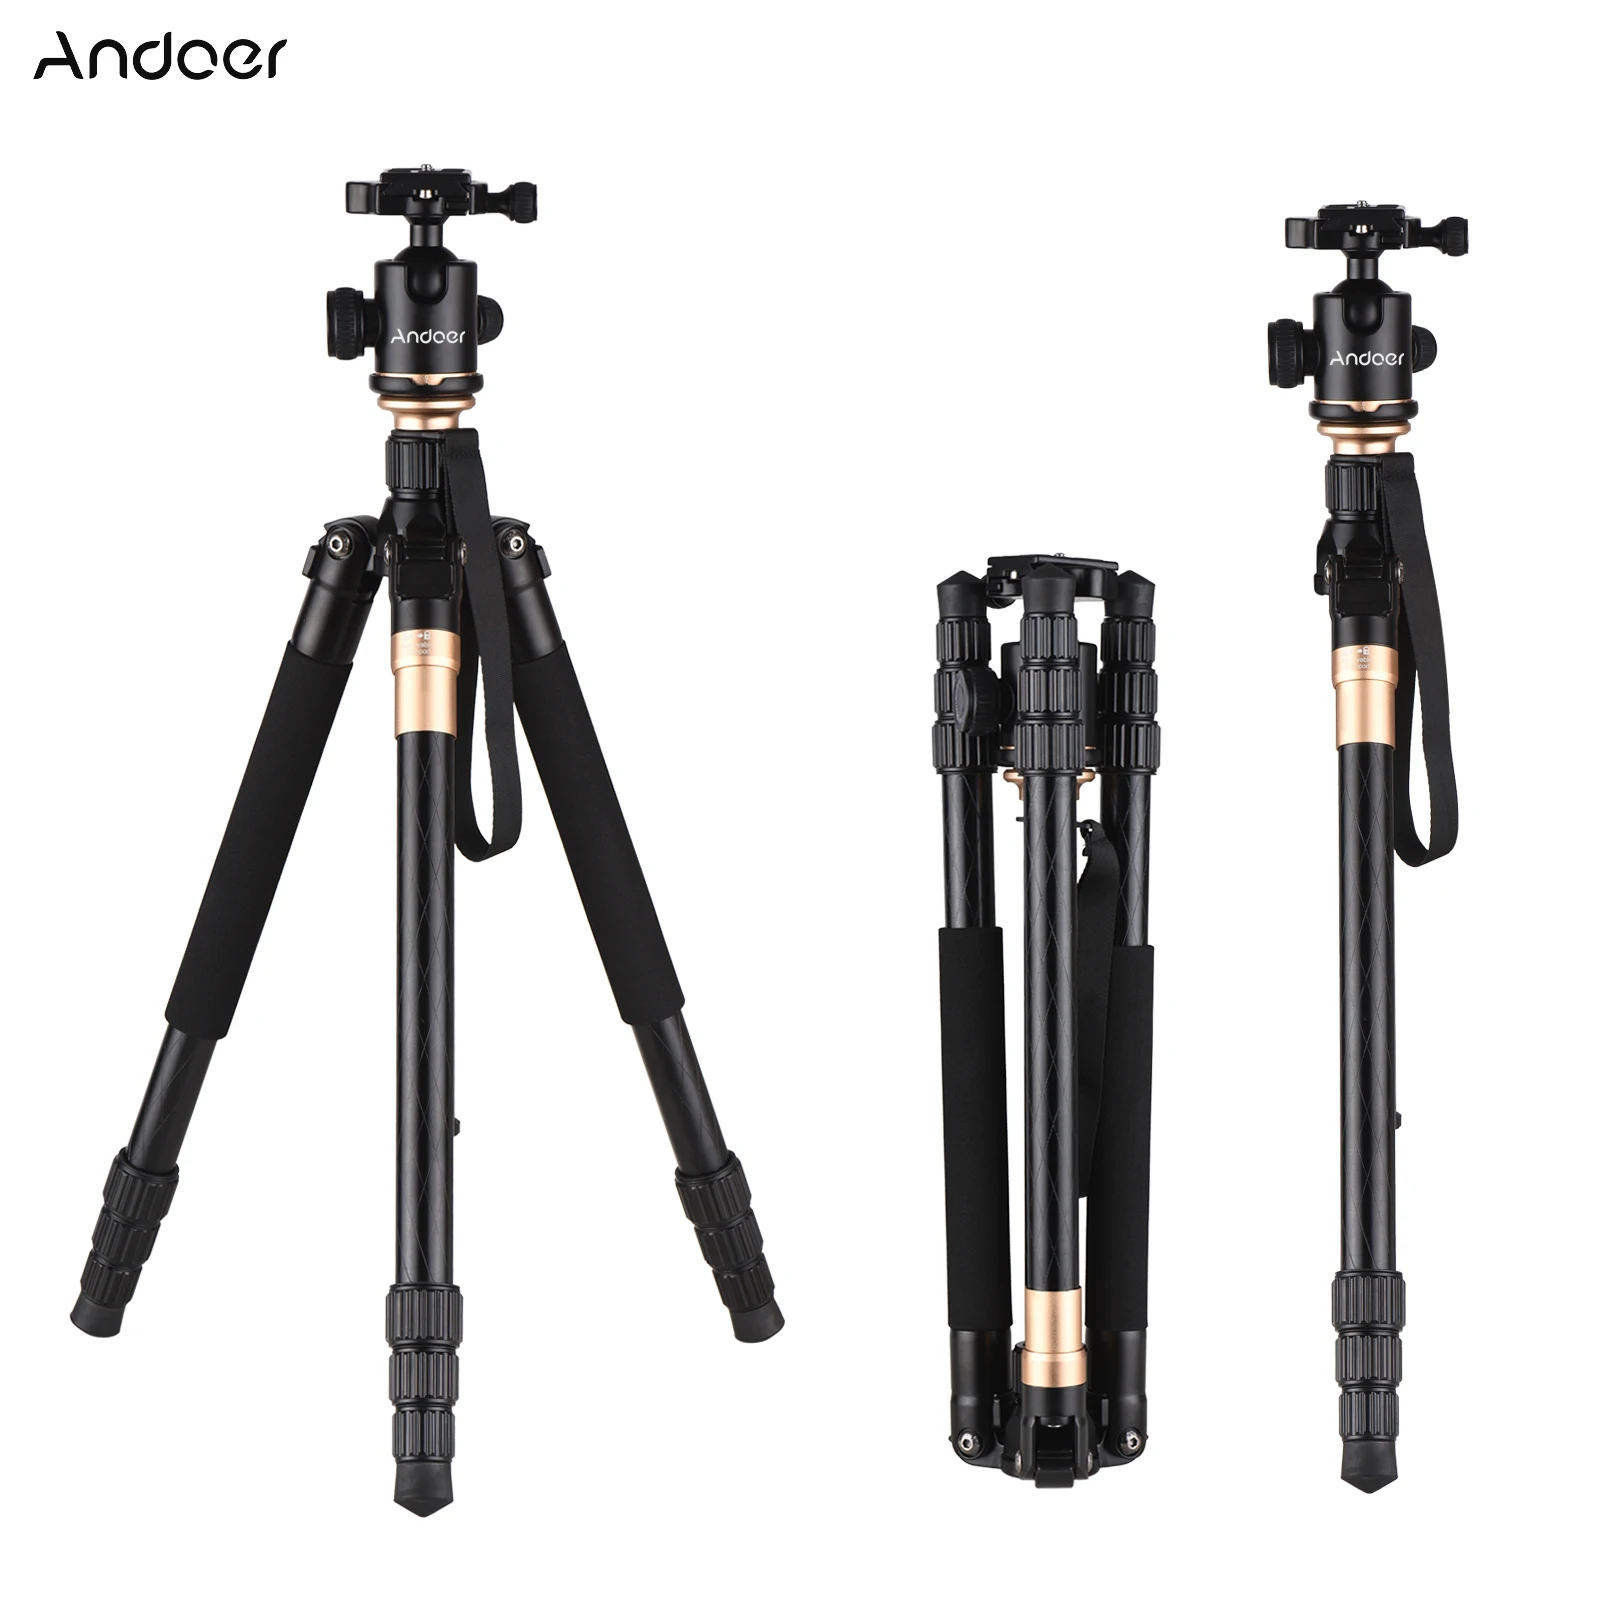 

Andoer Q999 158cm/62in Portable Photography Tripod Monopod Stand Aluminum Alloy Panorama Ball Head 10kg/22lbs Load Capacity